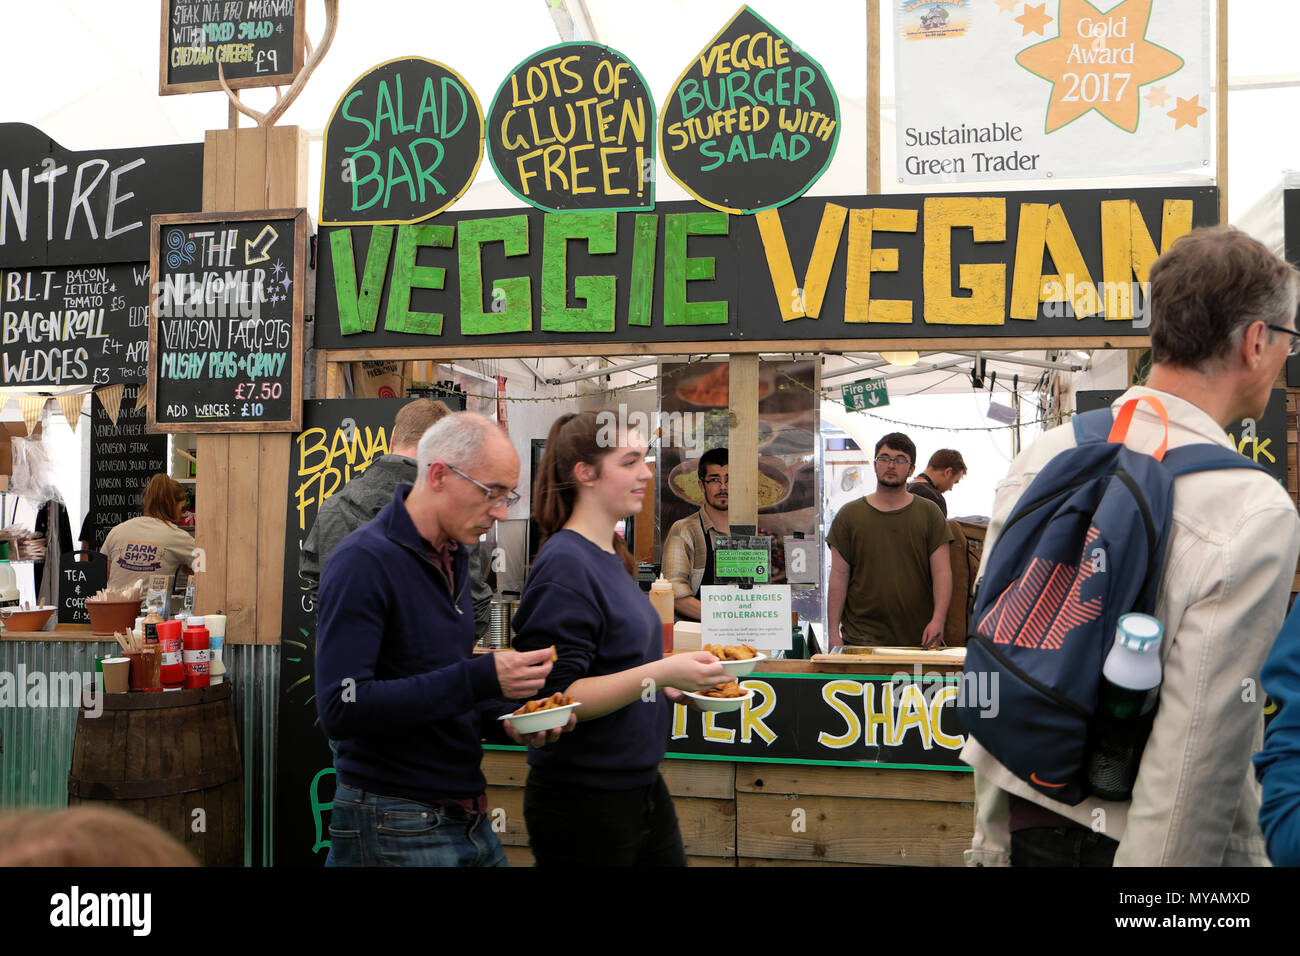 Veggie Vegan Fritter Shack Salad Bar and people outside food stall in the Hay Festival Food Hall at Hay-on-Wye Wales UK  KATHY DEWITT Stock Photo